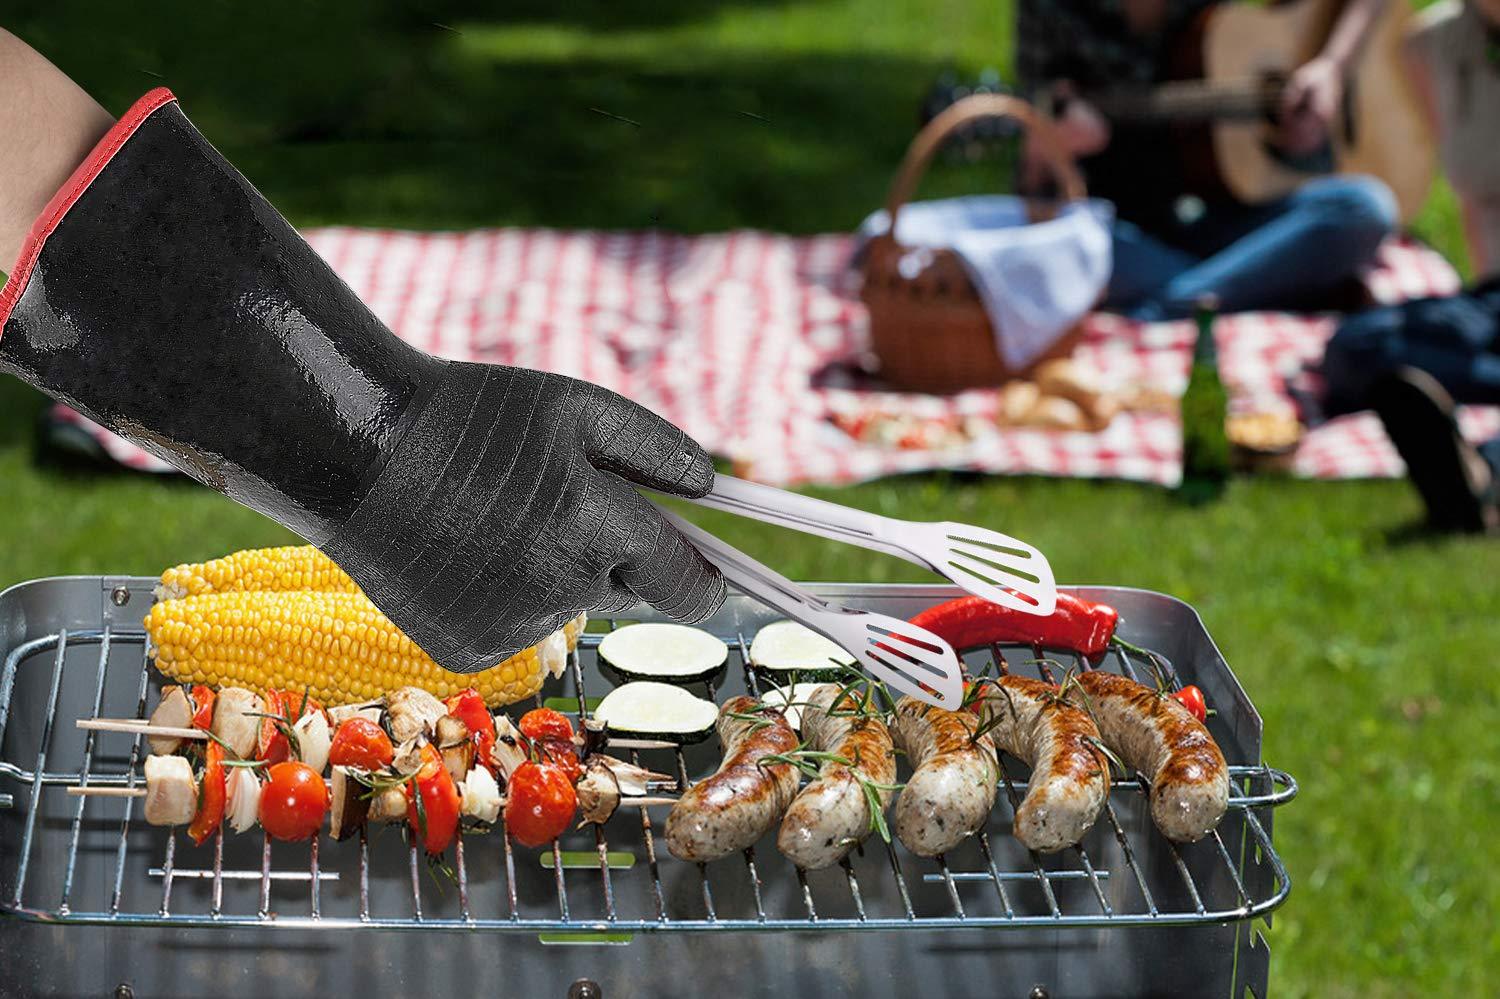 932°F Extreme Heat Resistant Gloves for Grill BBQ,Aillary Waterproof Long Sleeve Pit Grill Gloves for Fryer, Baking, Oven,Smoker,Fireproof, Oil Resistant Neoprene Coating（14-Inch ） - CookCave